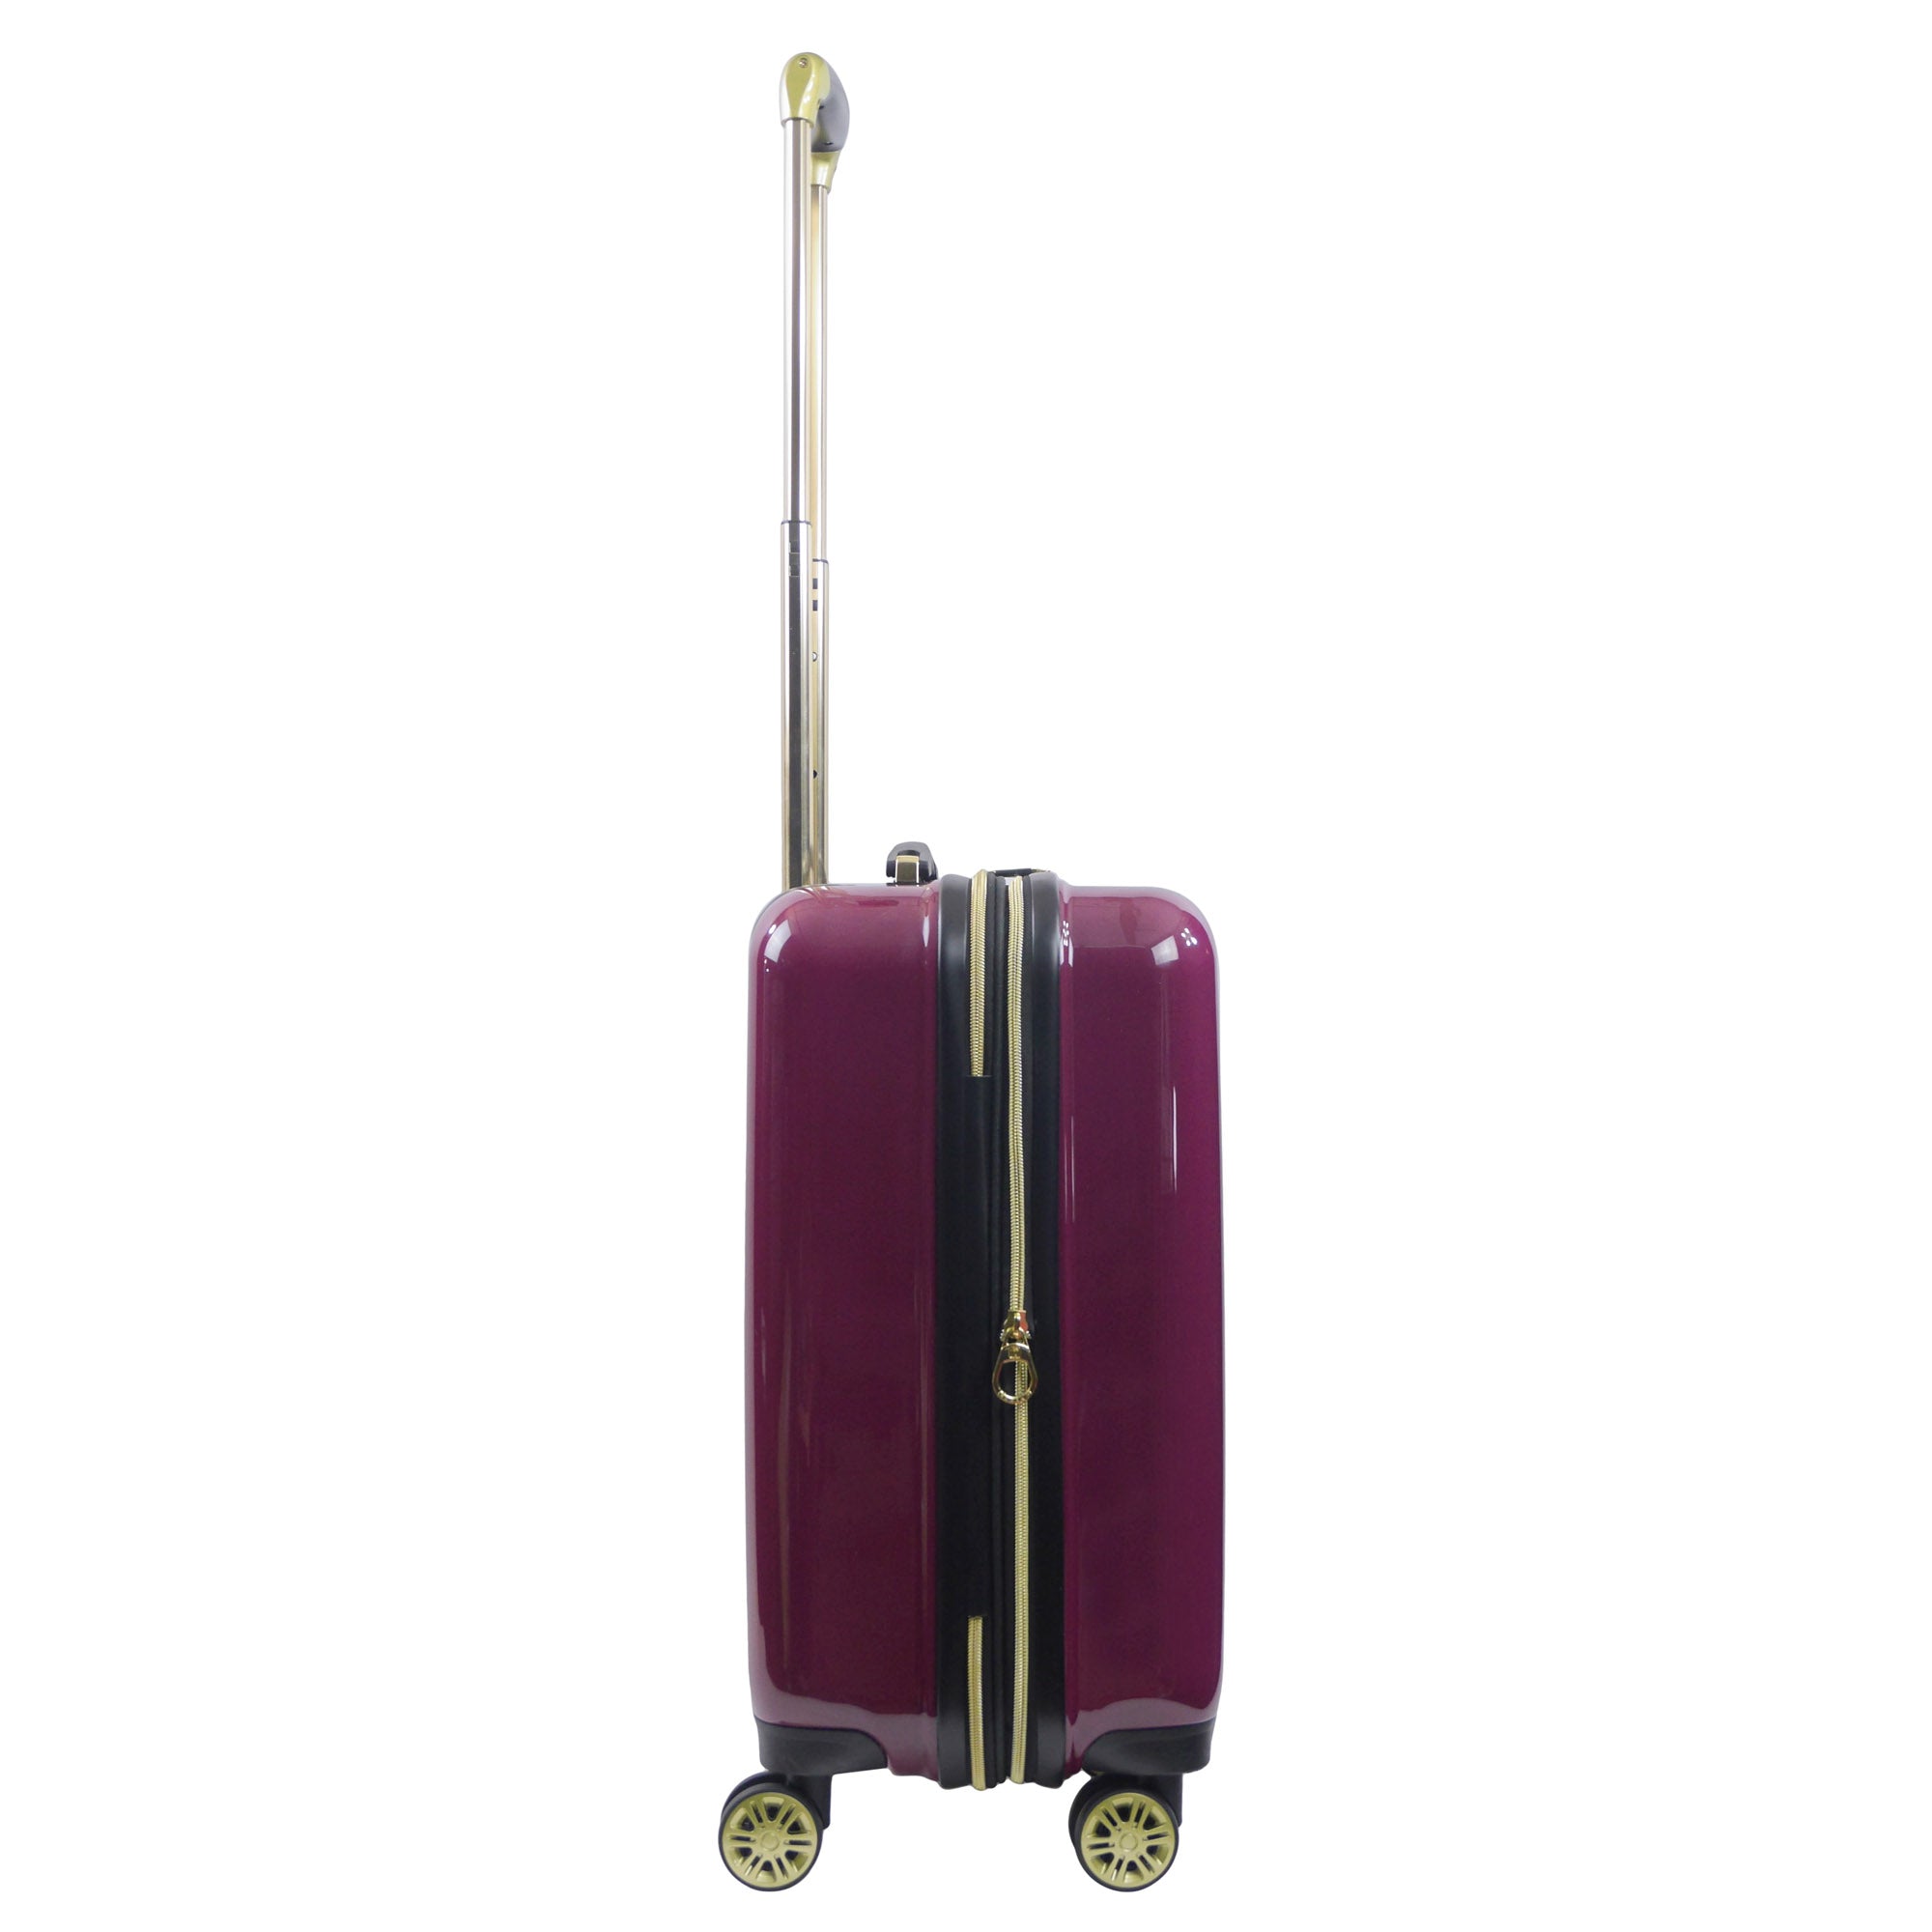 On Sale Harry Potter Hogwarts Express 21.5" carry-on suitcase Luggage Burgundy - best spinner suitcase for traveling